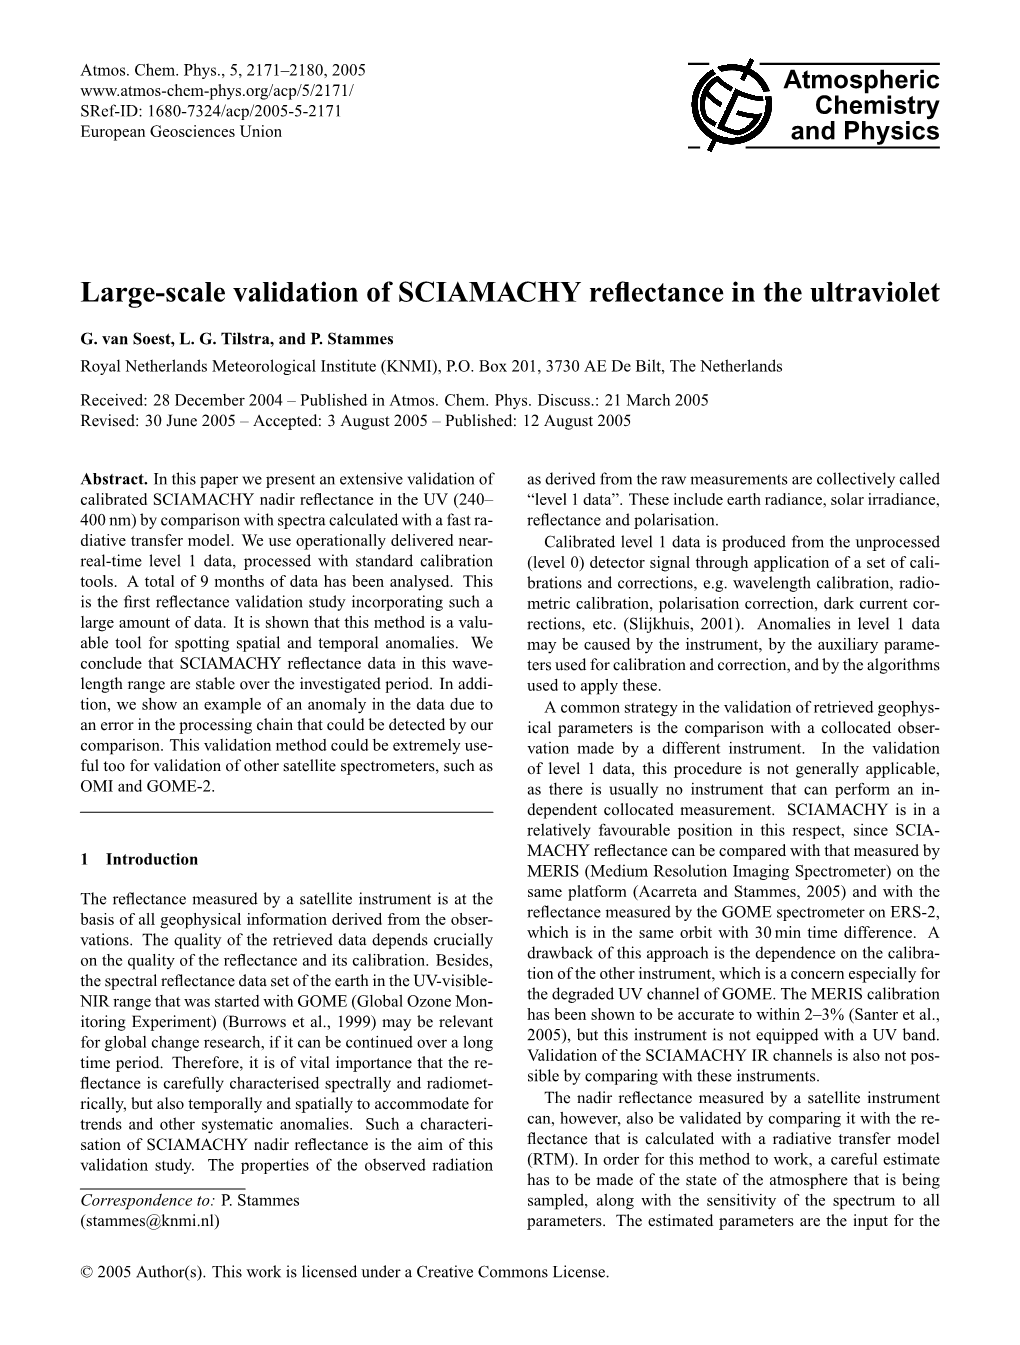 Large-Scale Validation of SCIAMACHY Reflectance in the Ultraviolet